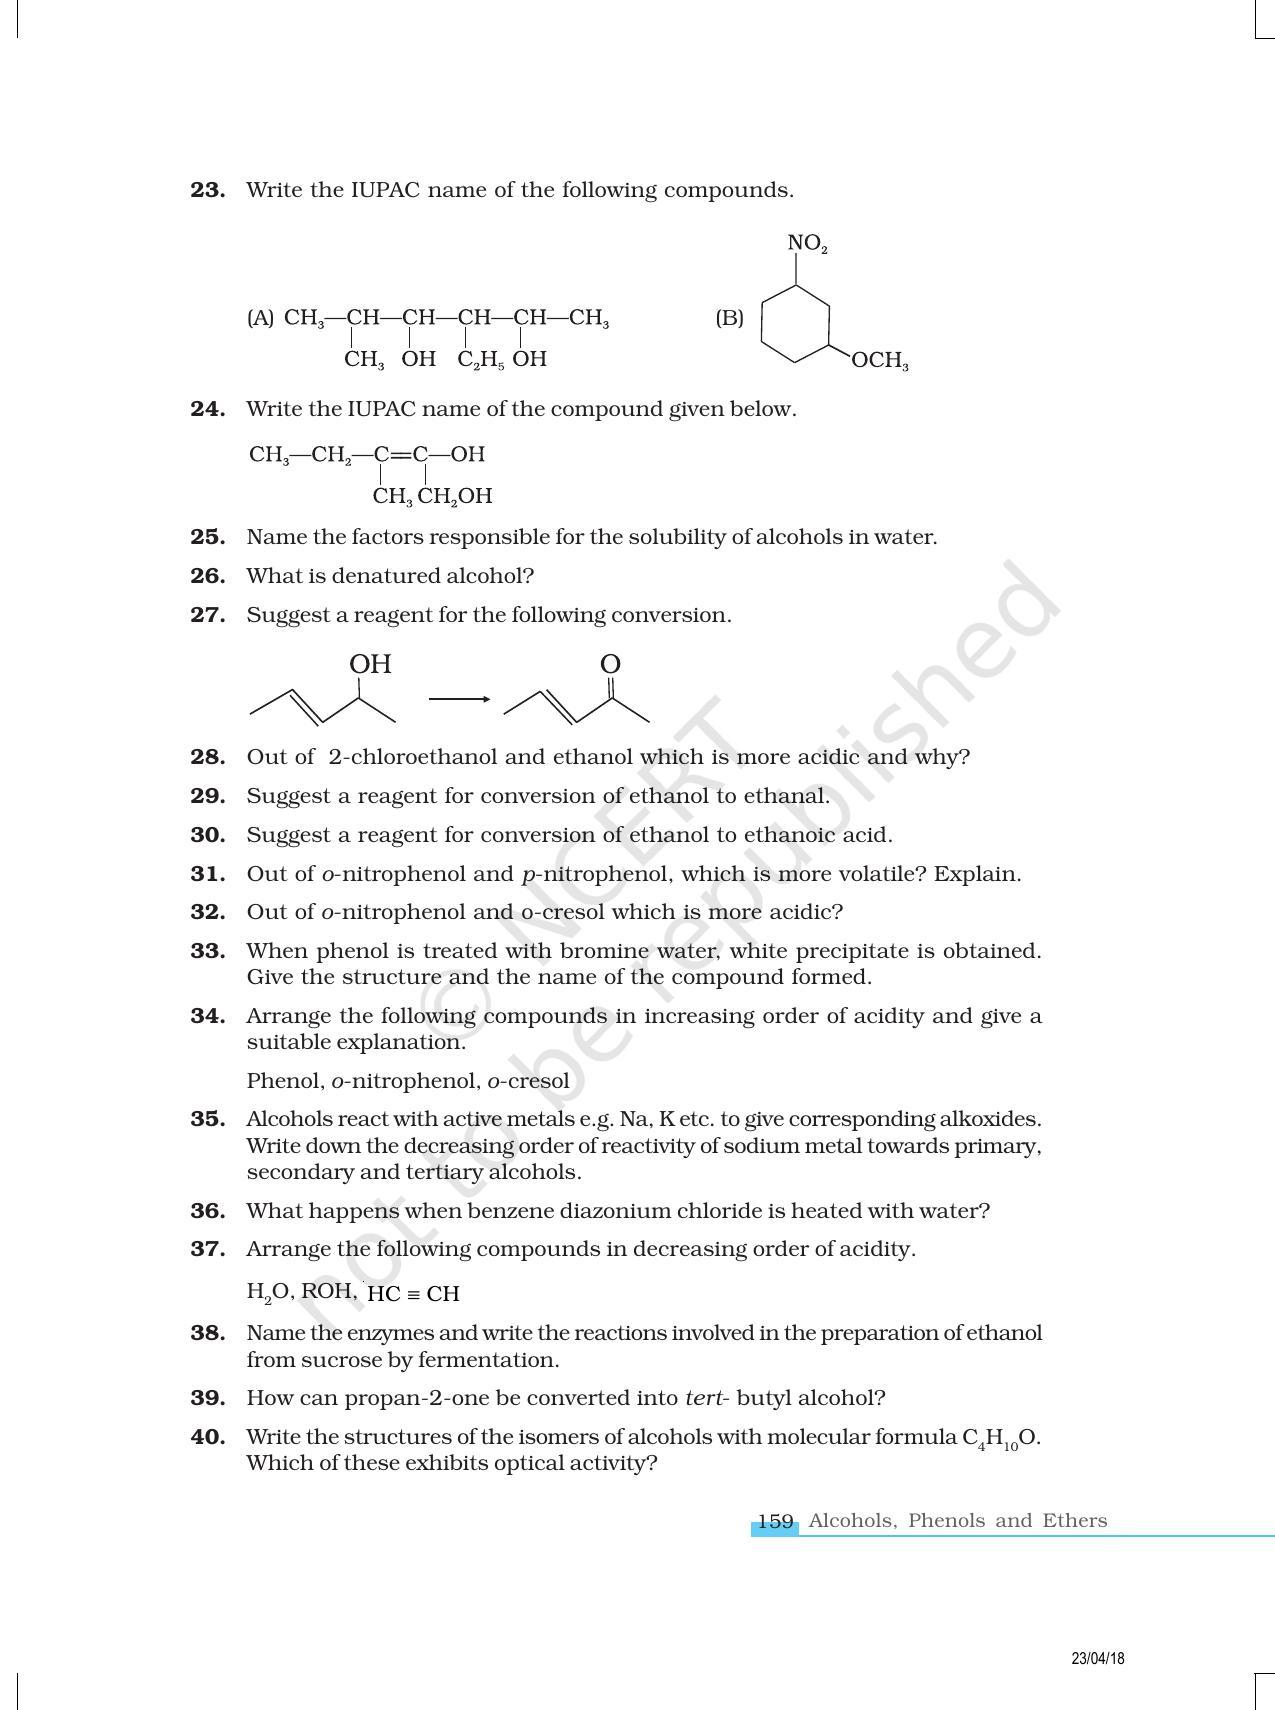 NCERT Exemplar Book for Class 12 Chemistry: Chapter 11 Alcohols, Phenols and Ethers - Page 6